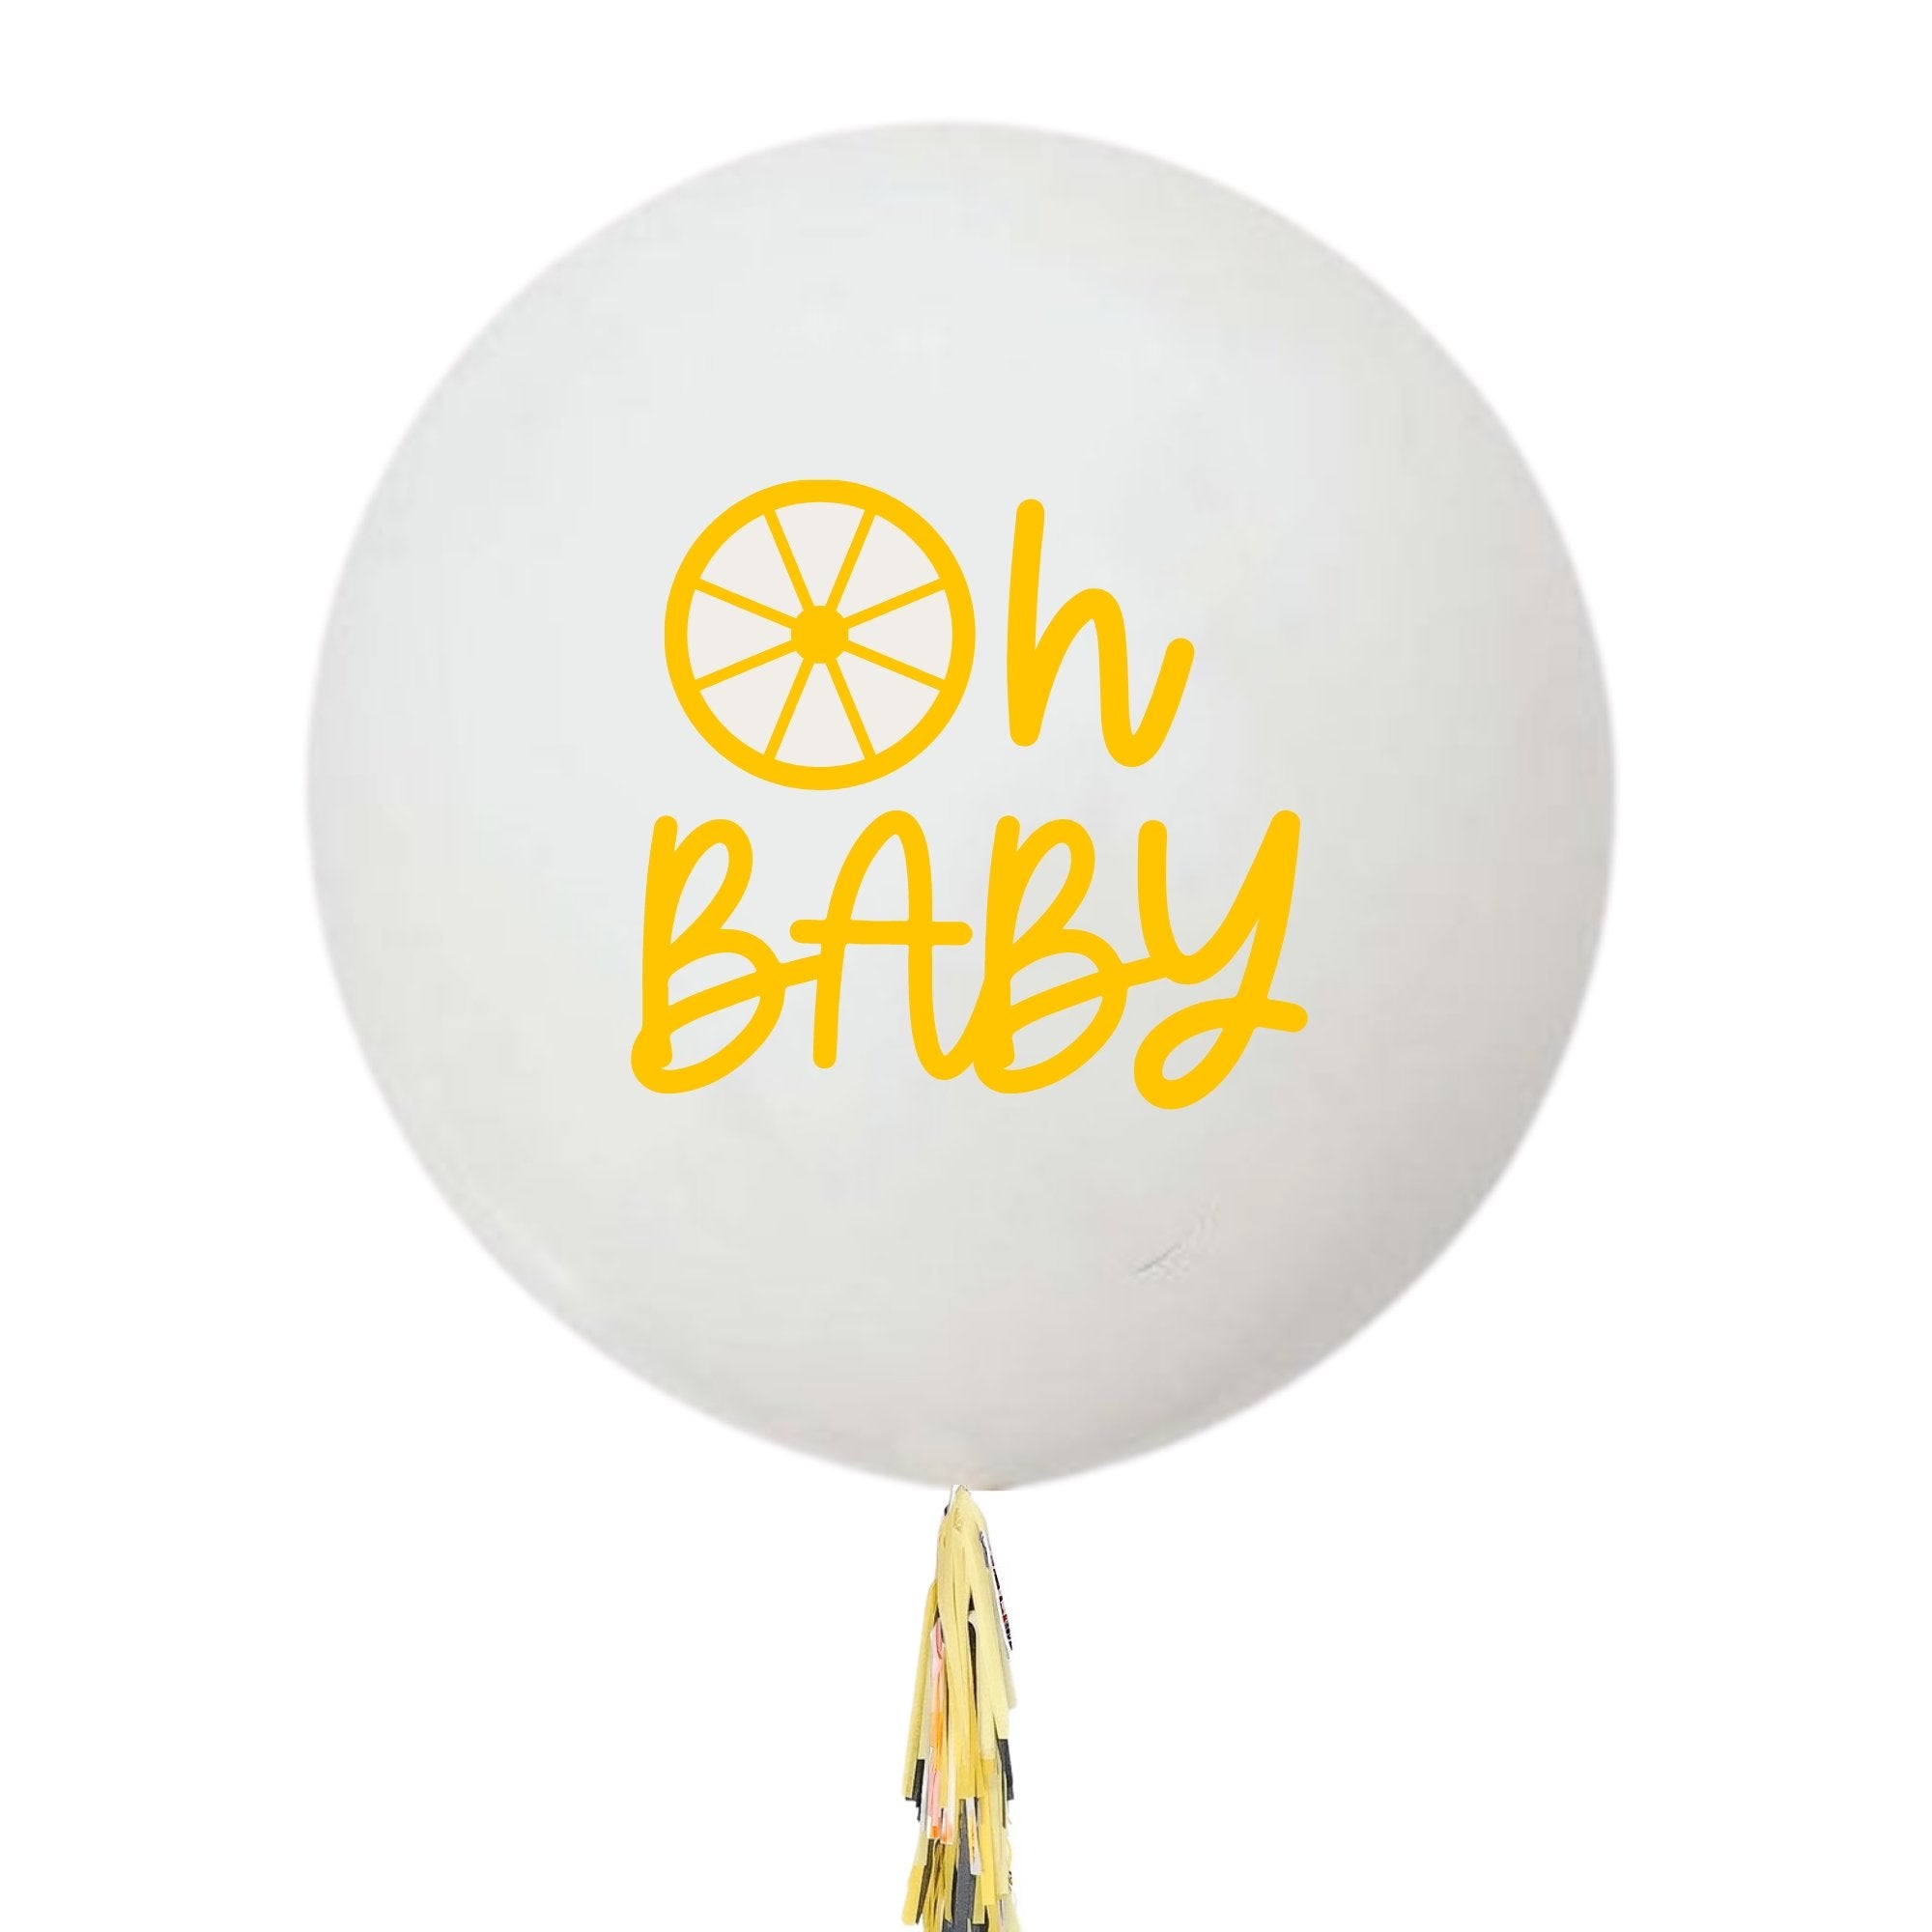 A white jumbo balloon reads "Oh Baby" on the front with the "O" as a lemon slice